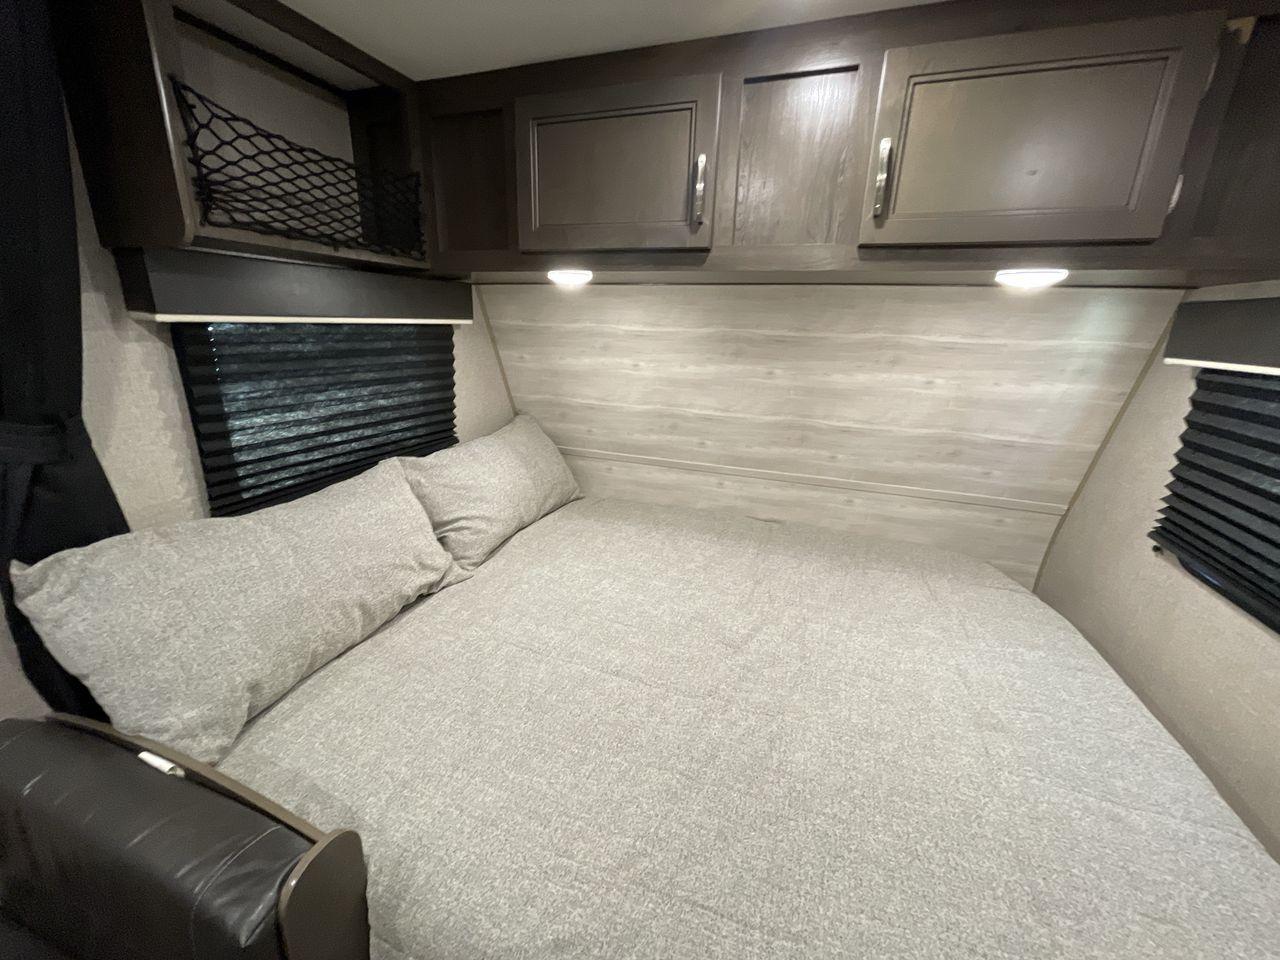 2021 JAYCO JAY FLIGHT SLX 174BH (1UJBJ0AJ1M1) , Length: 21.67 ft | Dry Weight: 3,075 lbs | GVWR: 3,950 lbs | Slides: 0 transmission, located at 4319 N Main St, Cleburne, TX, 76033, (817) 678-5133, 32.385960, -97.391212 - Take the 2021 Jayco Jay Flight SLX 174BH travel trailer out on your camping adventures. This lightweight and small RV is ideal for people looking for an affordable and cozy way to enjoy the great outdoors. The dimensions of this unit are 21.67 ft in length, 7.08 ft in width, and 9.17 ft in height. I - Photo #16